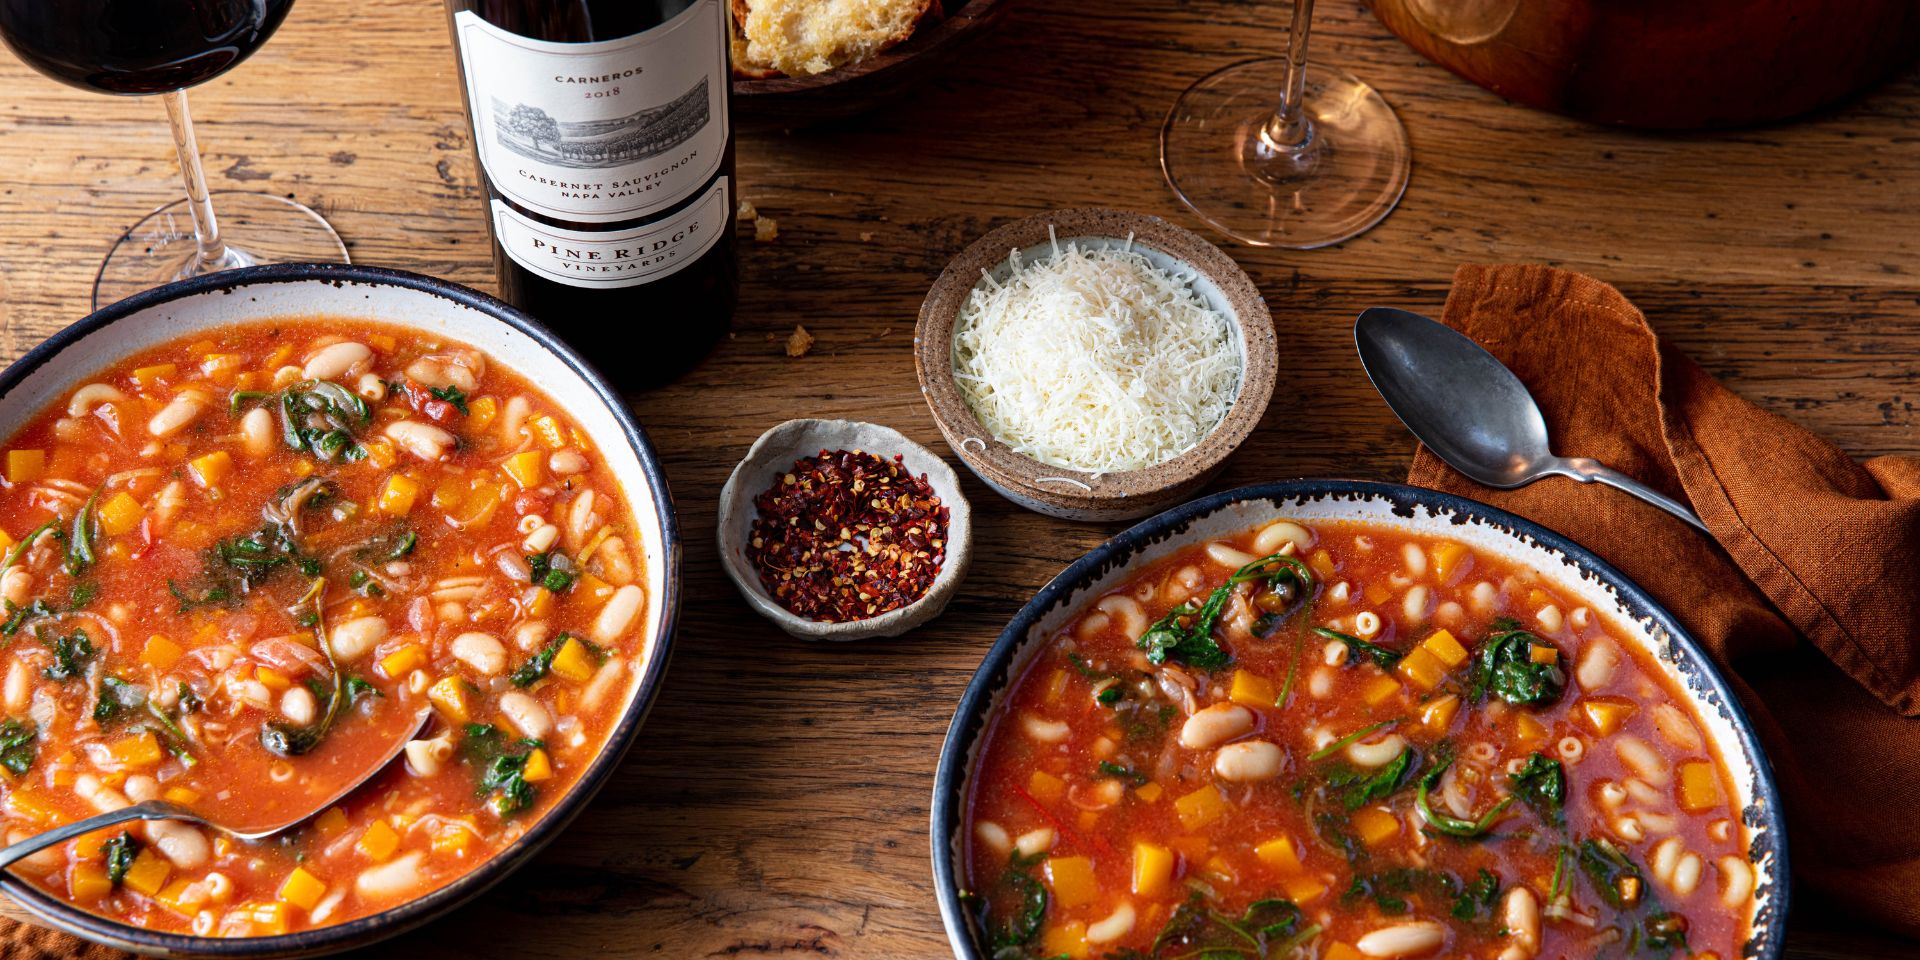 Pine Ridge Cabernet paired with Minestrone soup